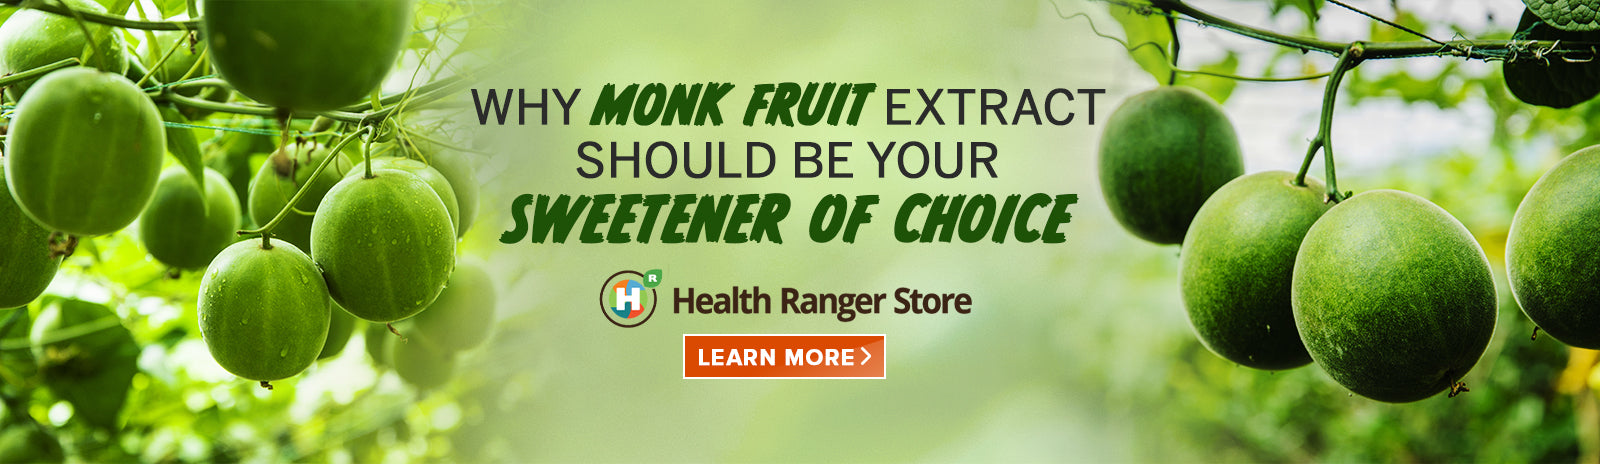 Have you heard of Monk Fruit, the Low-Carb Healthy Sugar Substitute?